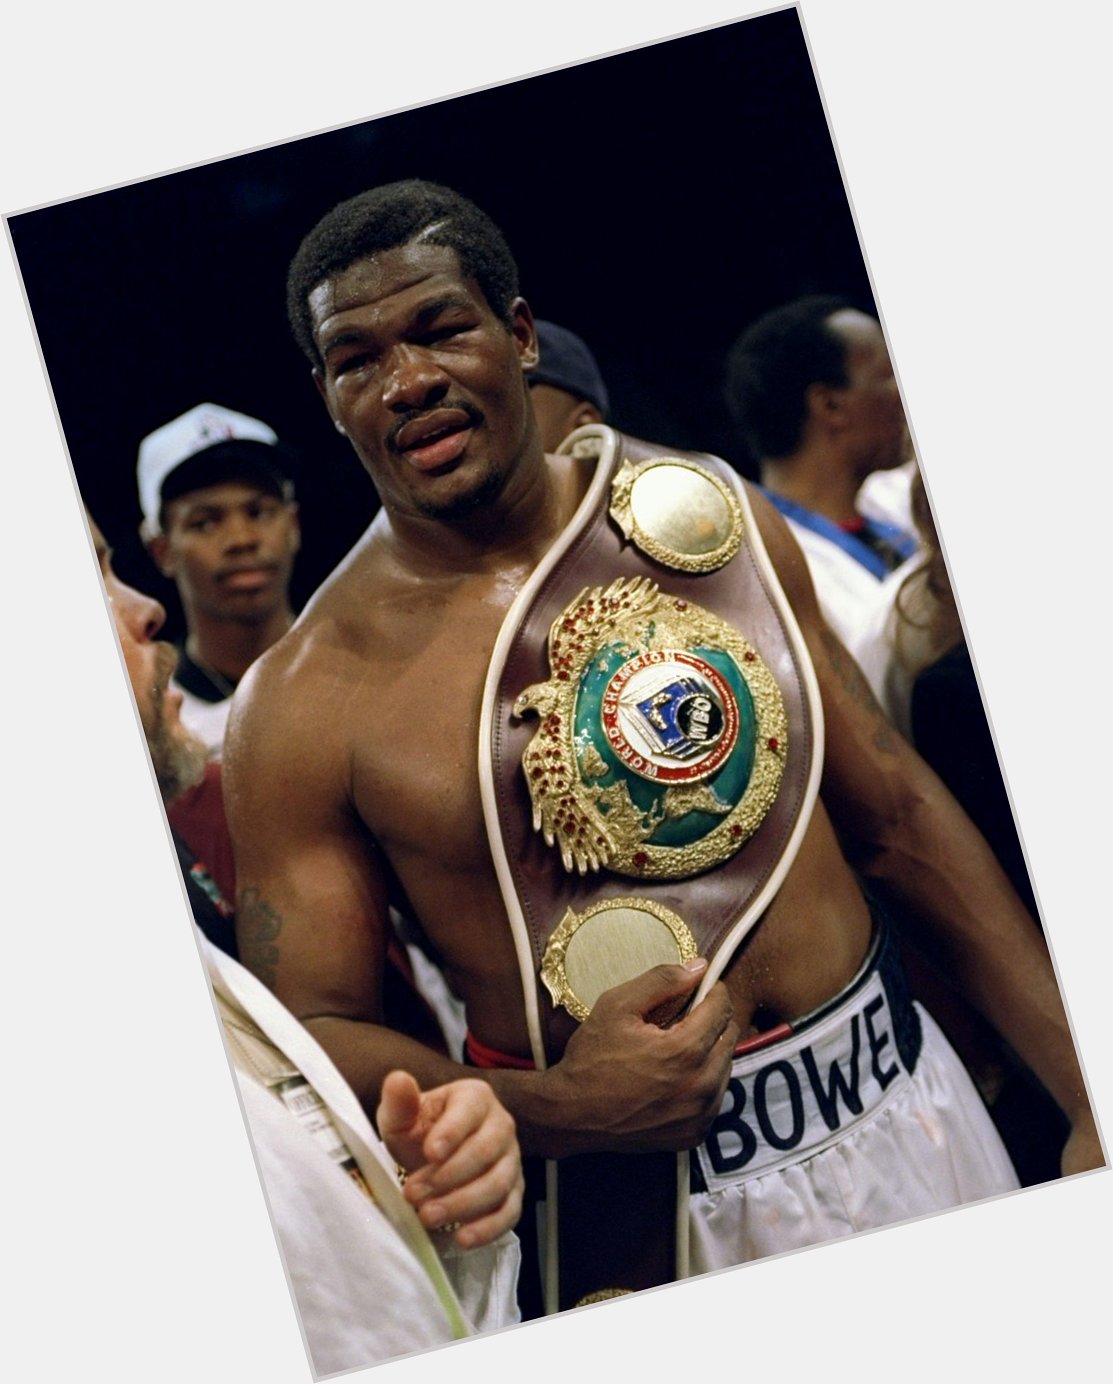 Happy 48th Birthday to former two-time world heavyweight champion, Riddick Bowe! 